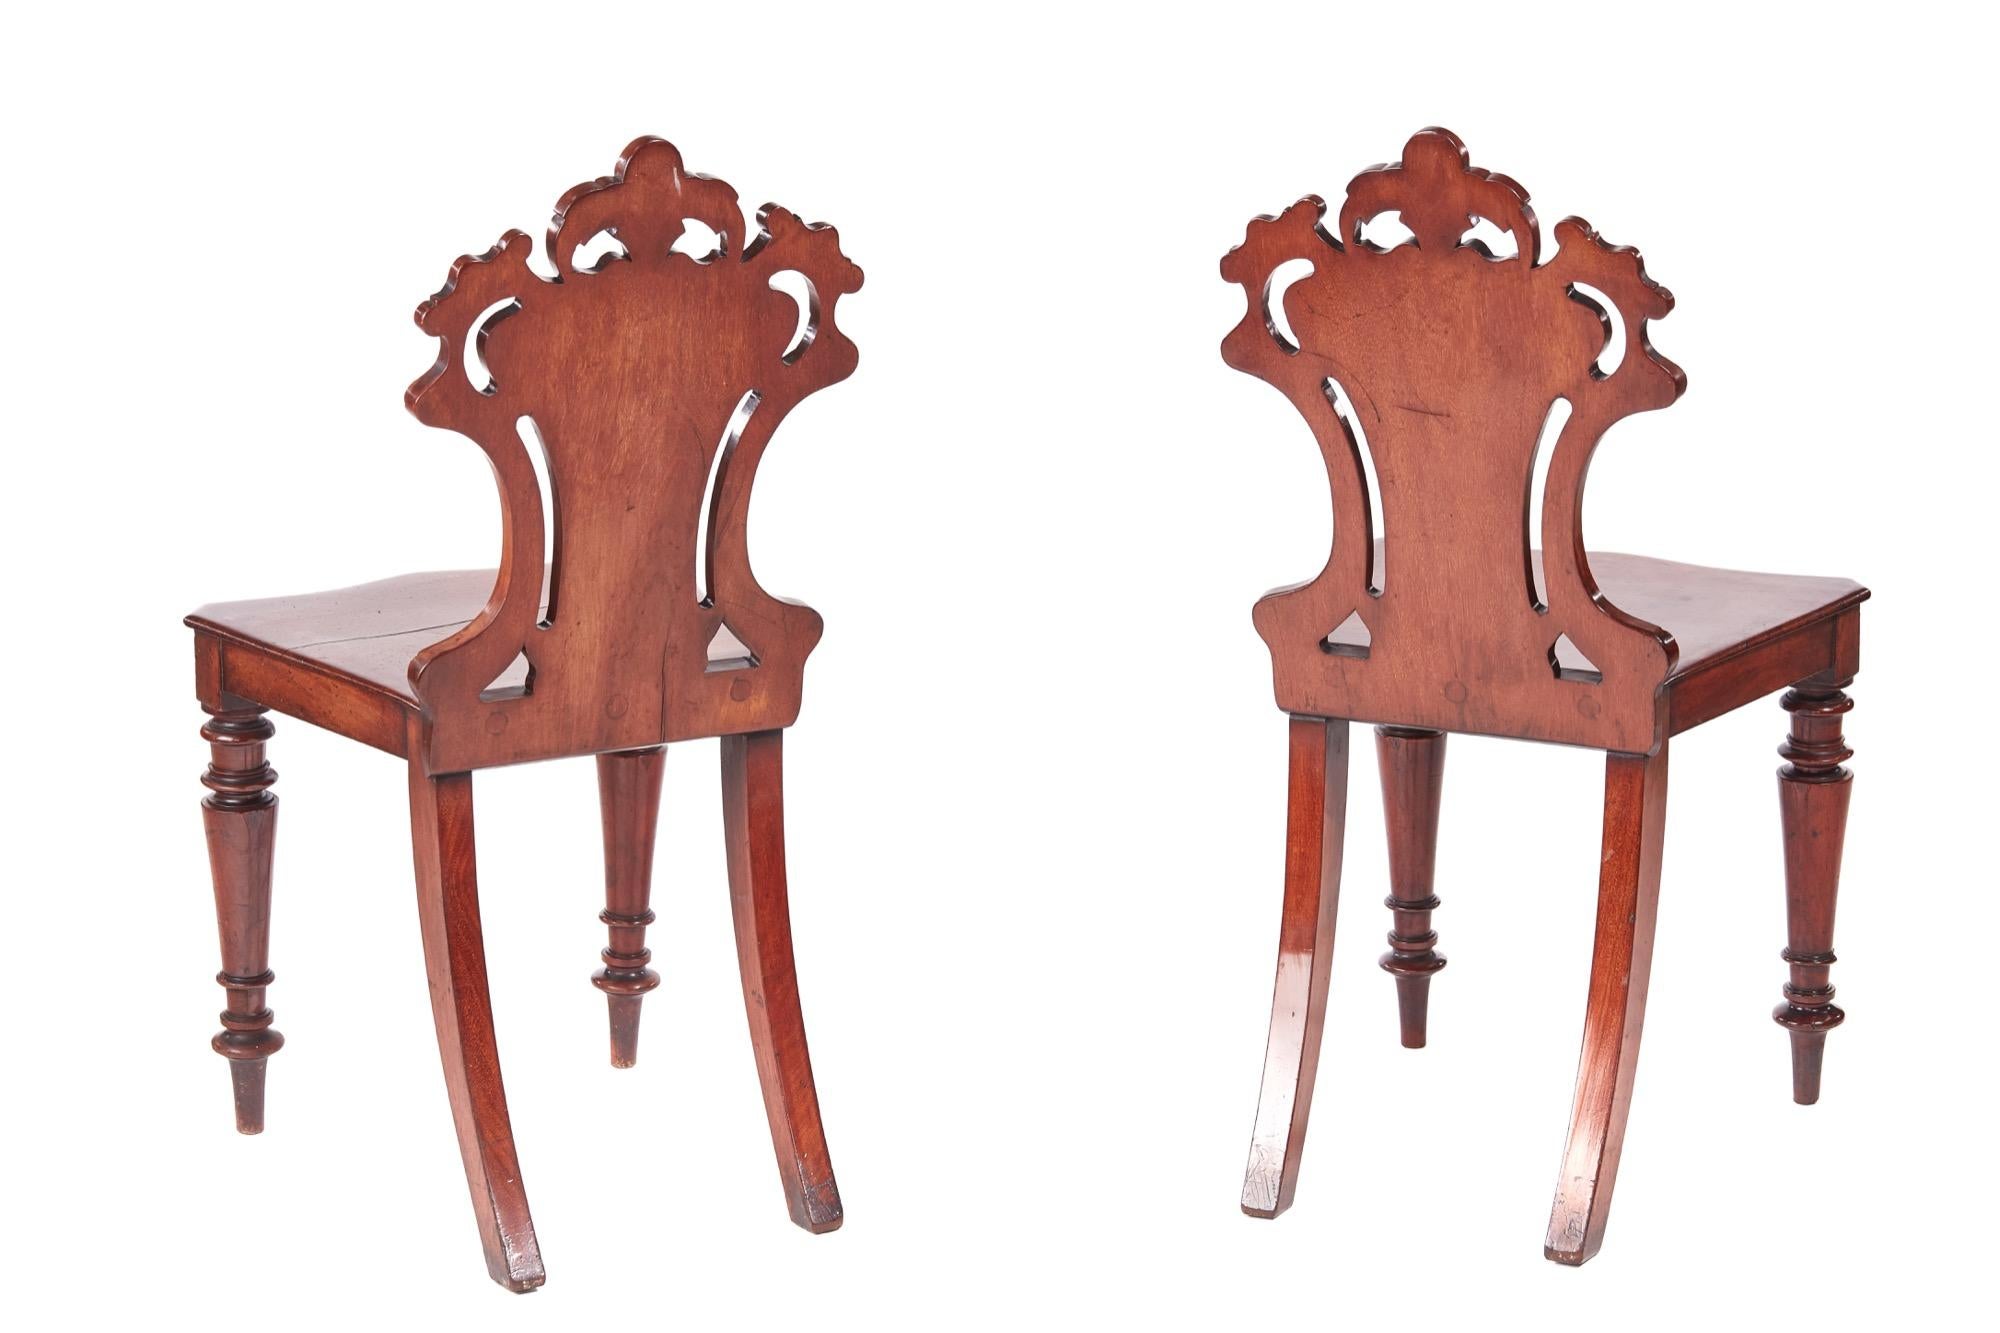 Quality pair of William IV mahogany hall chairs with expertly carved solid mahogany shaped backs, mahogany seats and elegant shaped turned legs to the front and out swept back legs.

These chairs are beautifully designed in a wonderful color and